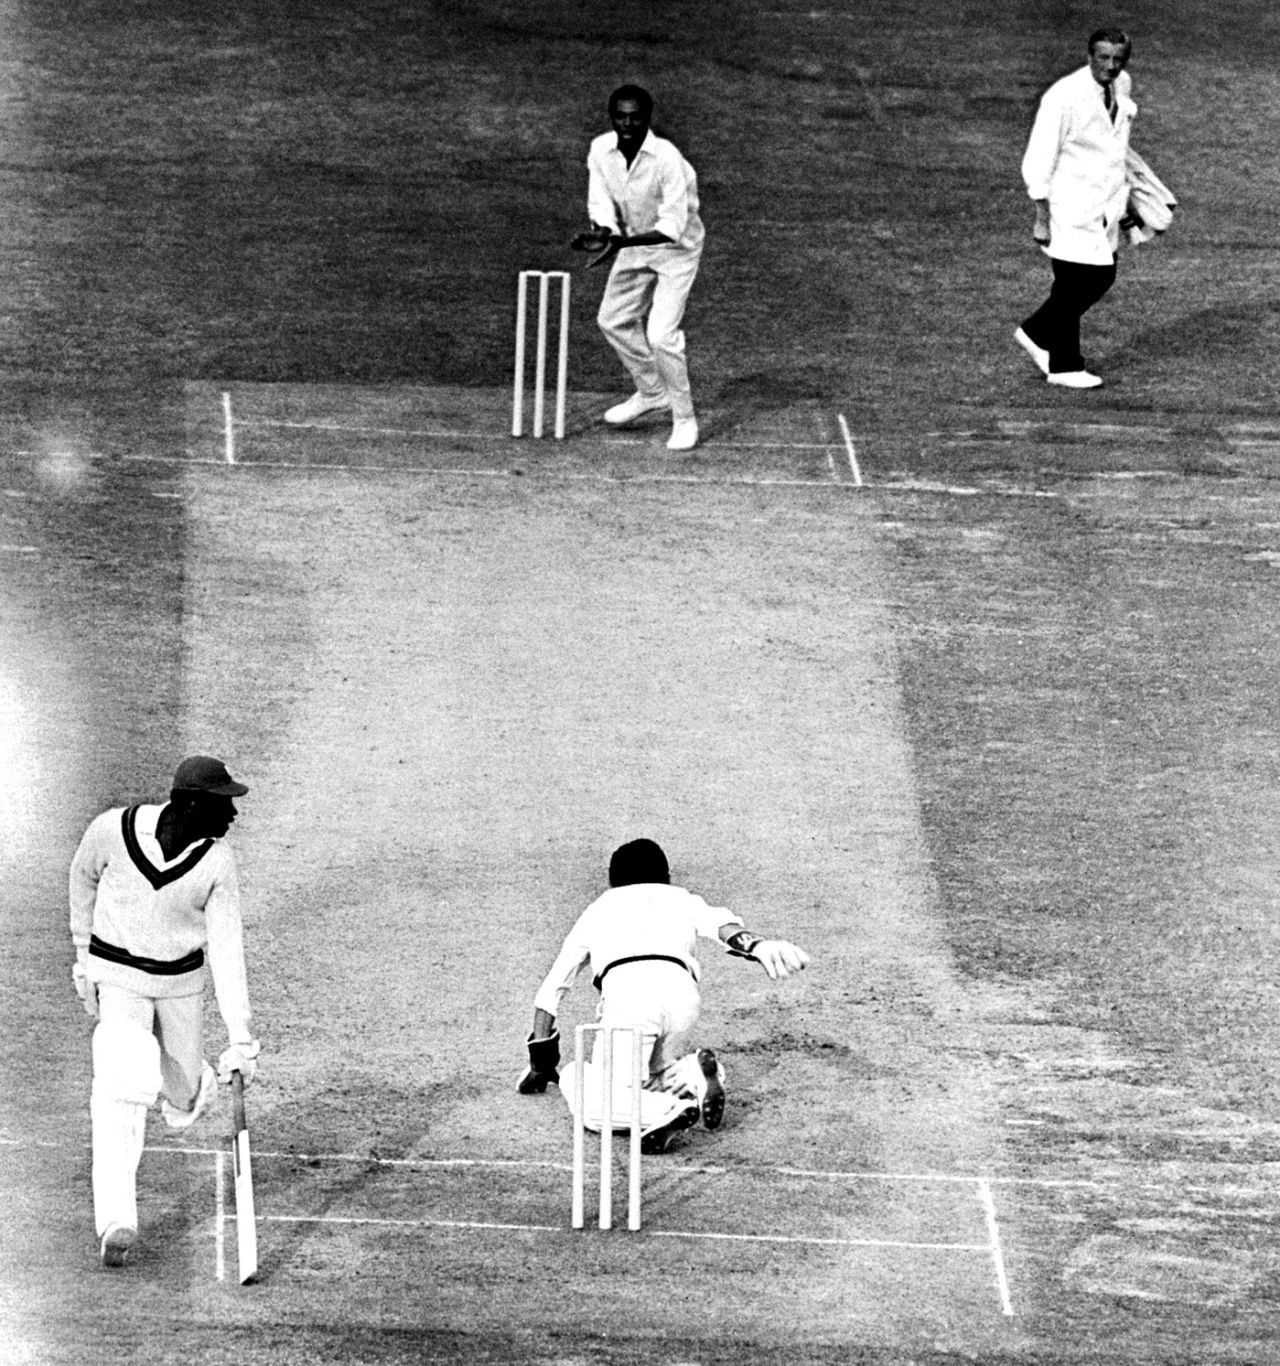 Clive Lloyd makes his ground as keeper Deryck Murray throws the ball to Lance Gibbs at the non-striker's end, Lancashire v Warwickshire, Gillette Cup final, Lord's, September 2, 1972